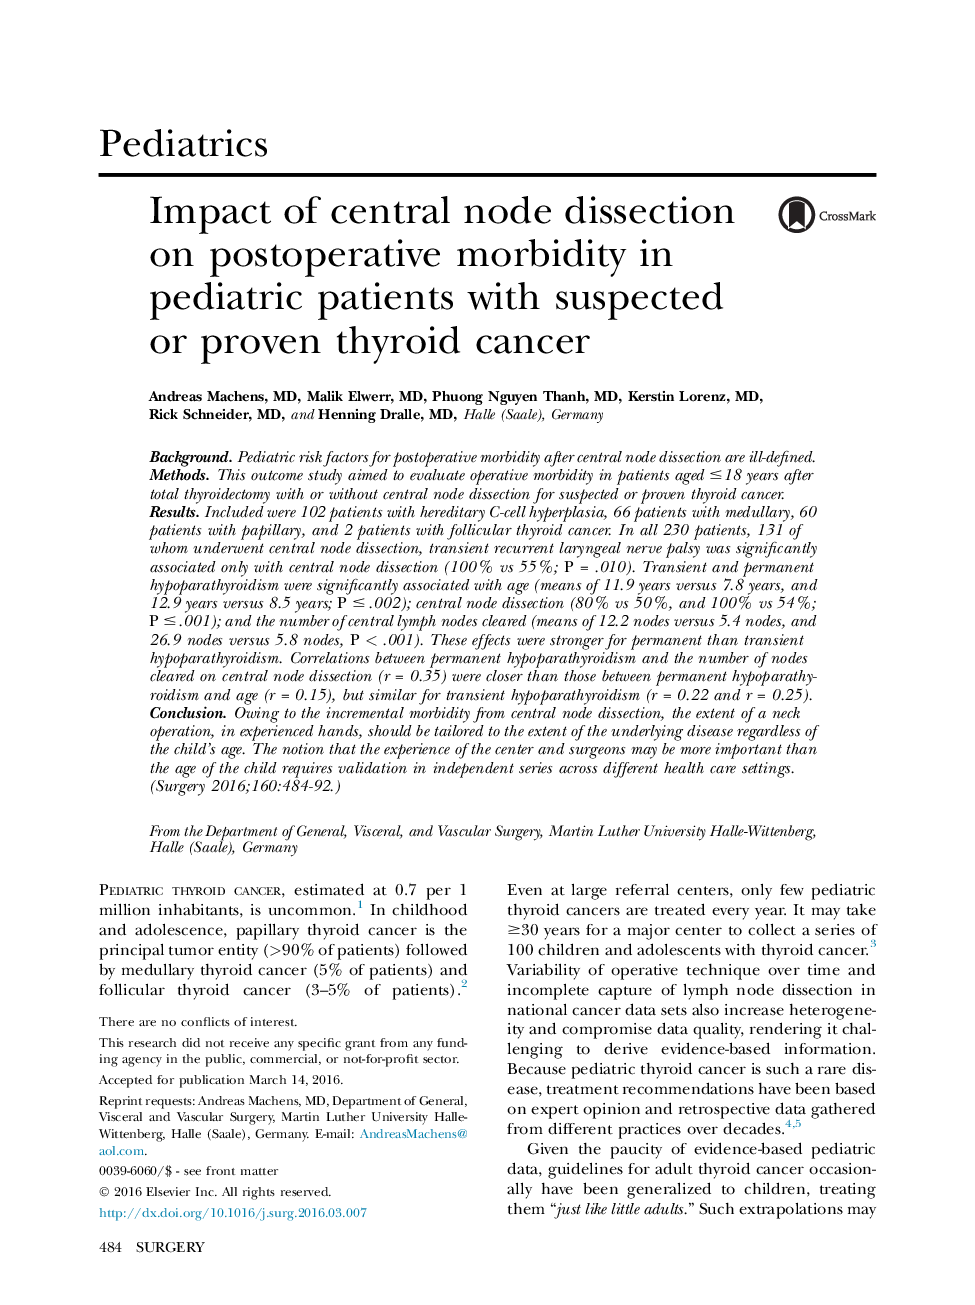 PediatricsImpact of central node dissection on postoperative morbidity in pediatric patients with suspected or proven thyroid cancer